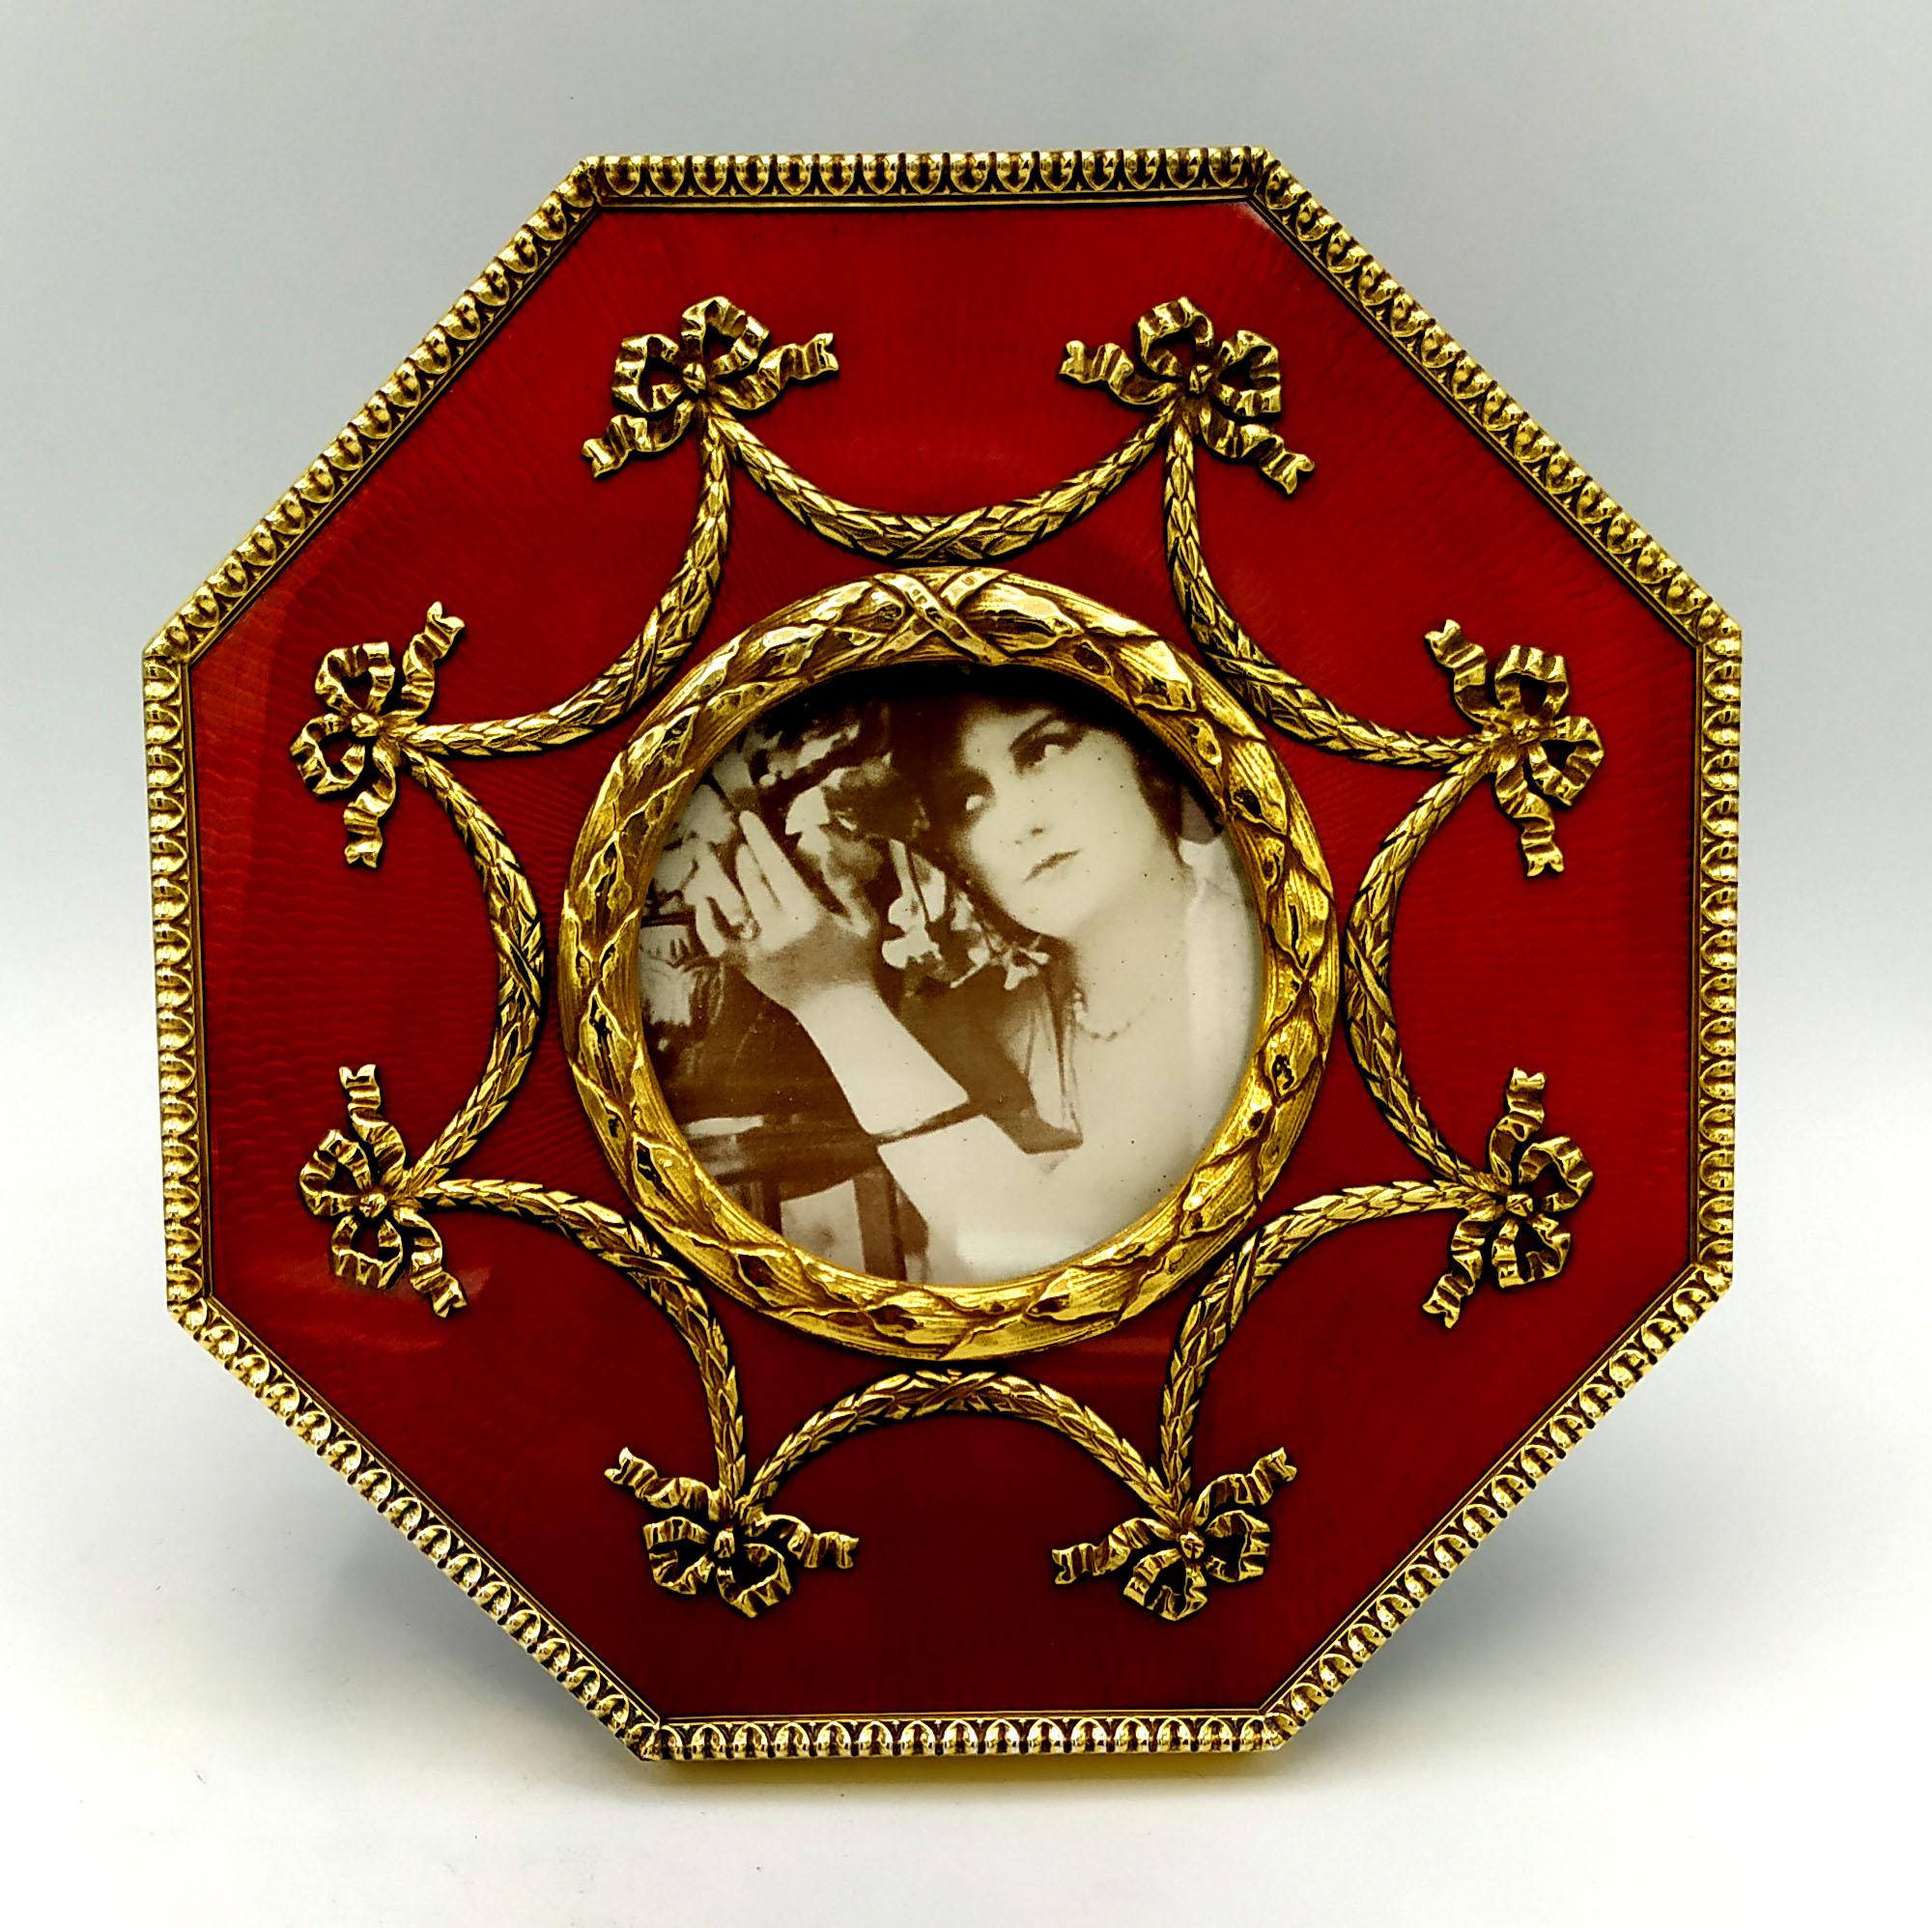 Large octagonal table frame for round photos diameter cm. 7, in 925/1000 sterling silver gold plated with translucent fired enamel on sunburst guilloche, with Napoleon III French Empire style borders and ornaments. External cm. 17 x 17. Weight gr.